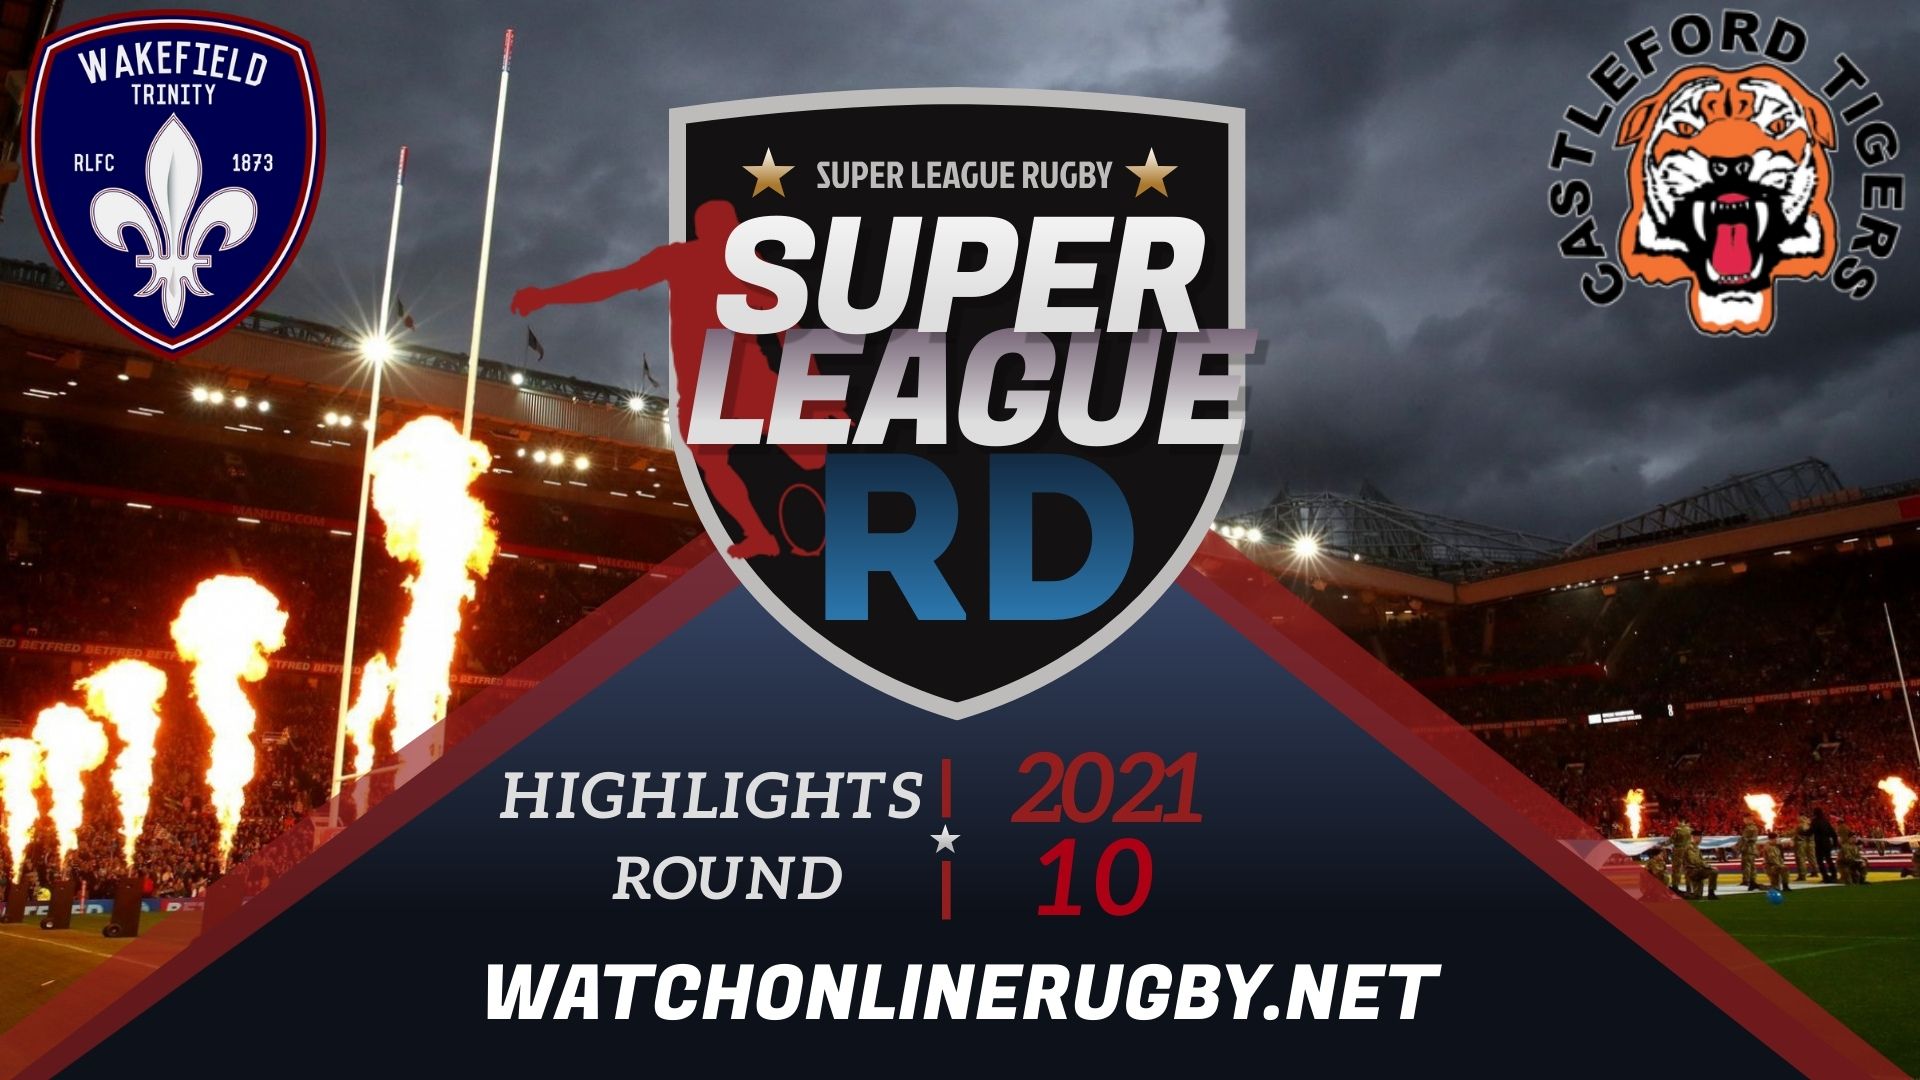 Wakefield Trinity Vs Castleford Tigers Super League Rugby 2021 RD 10